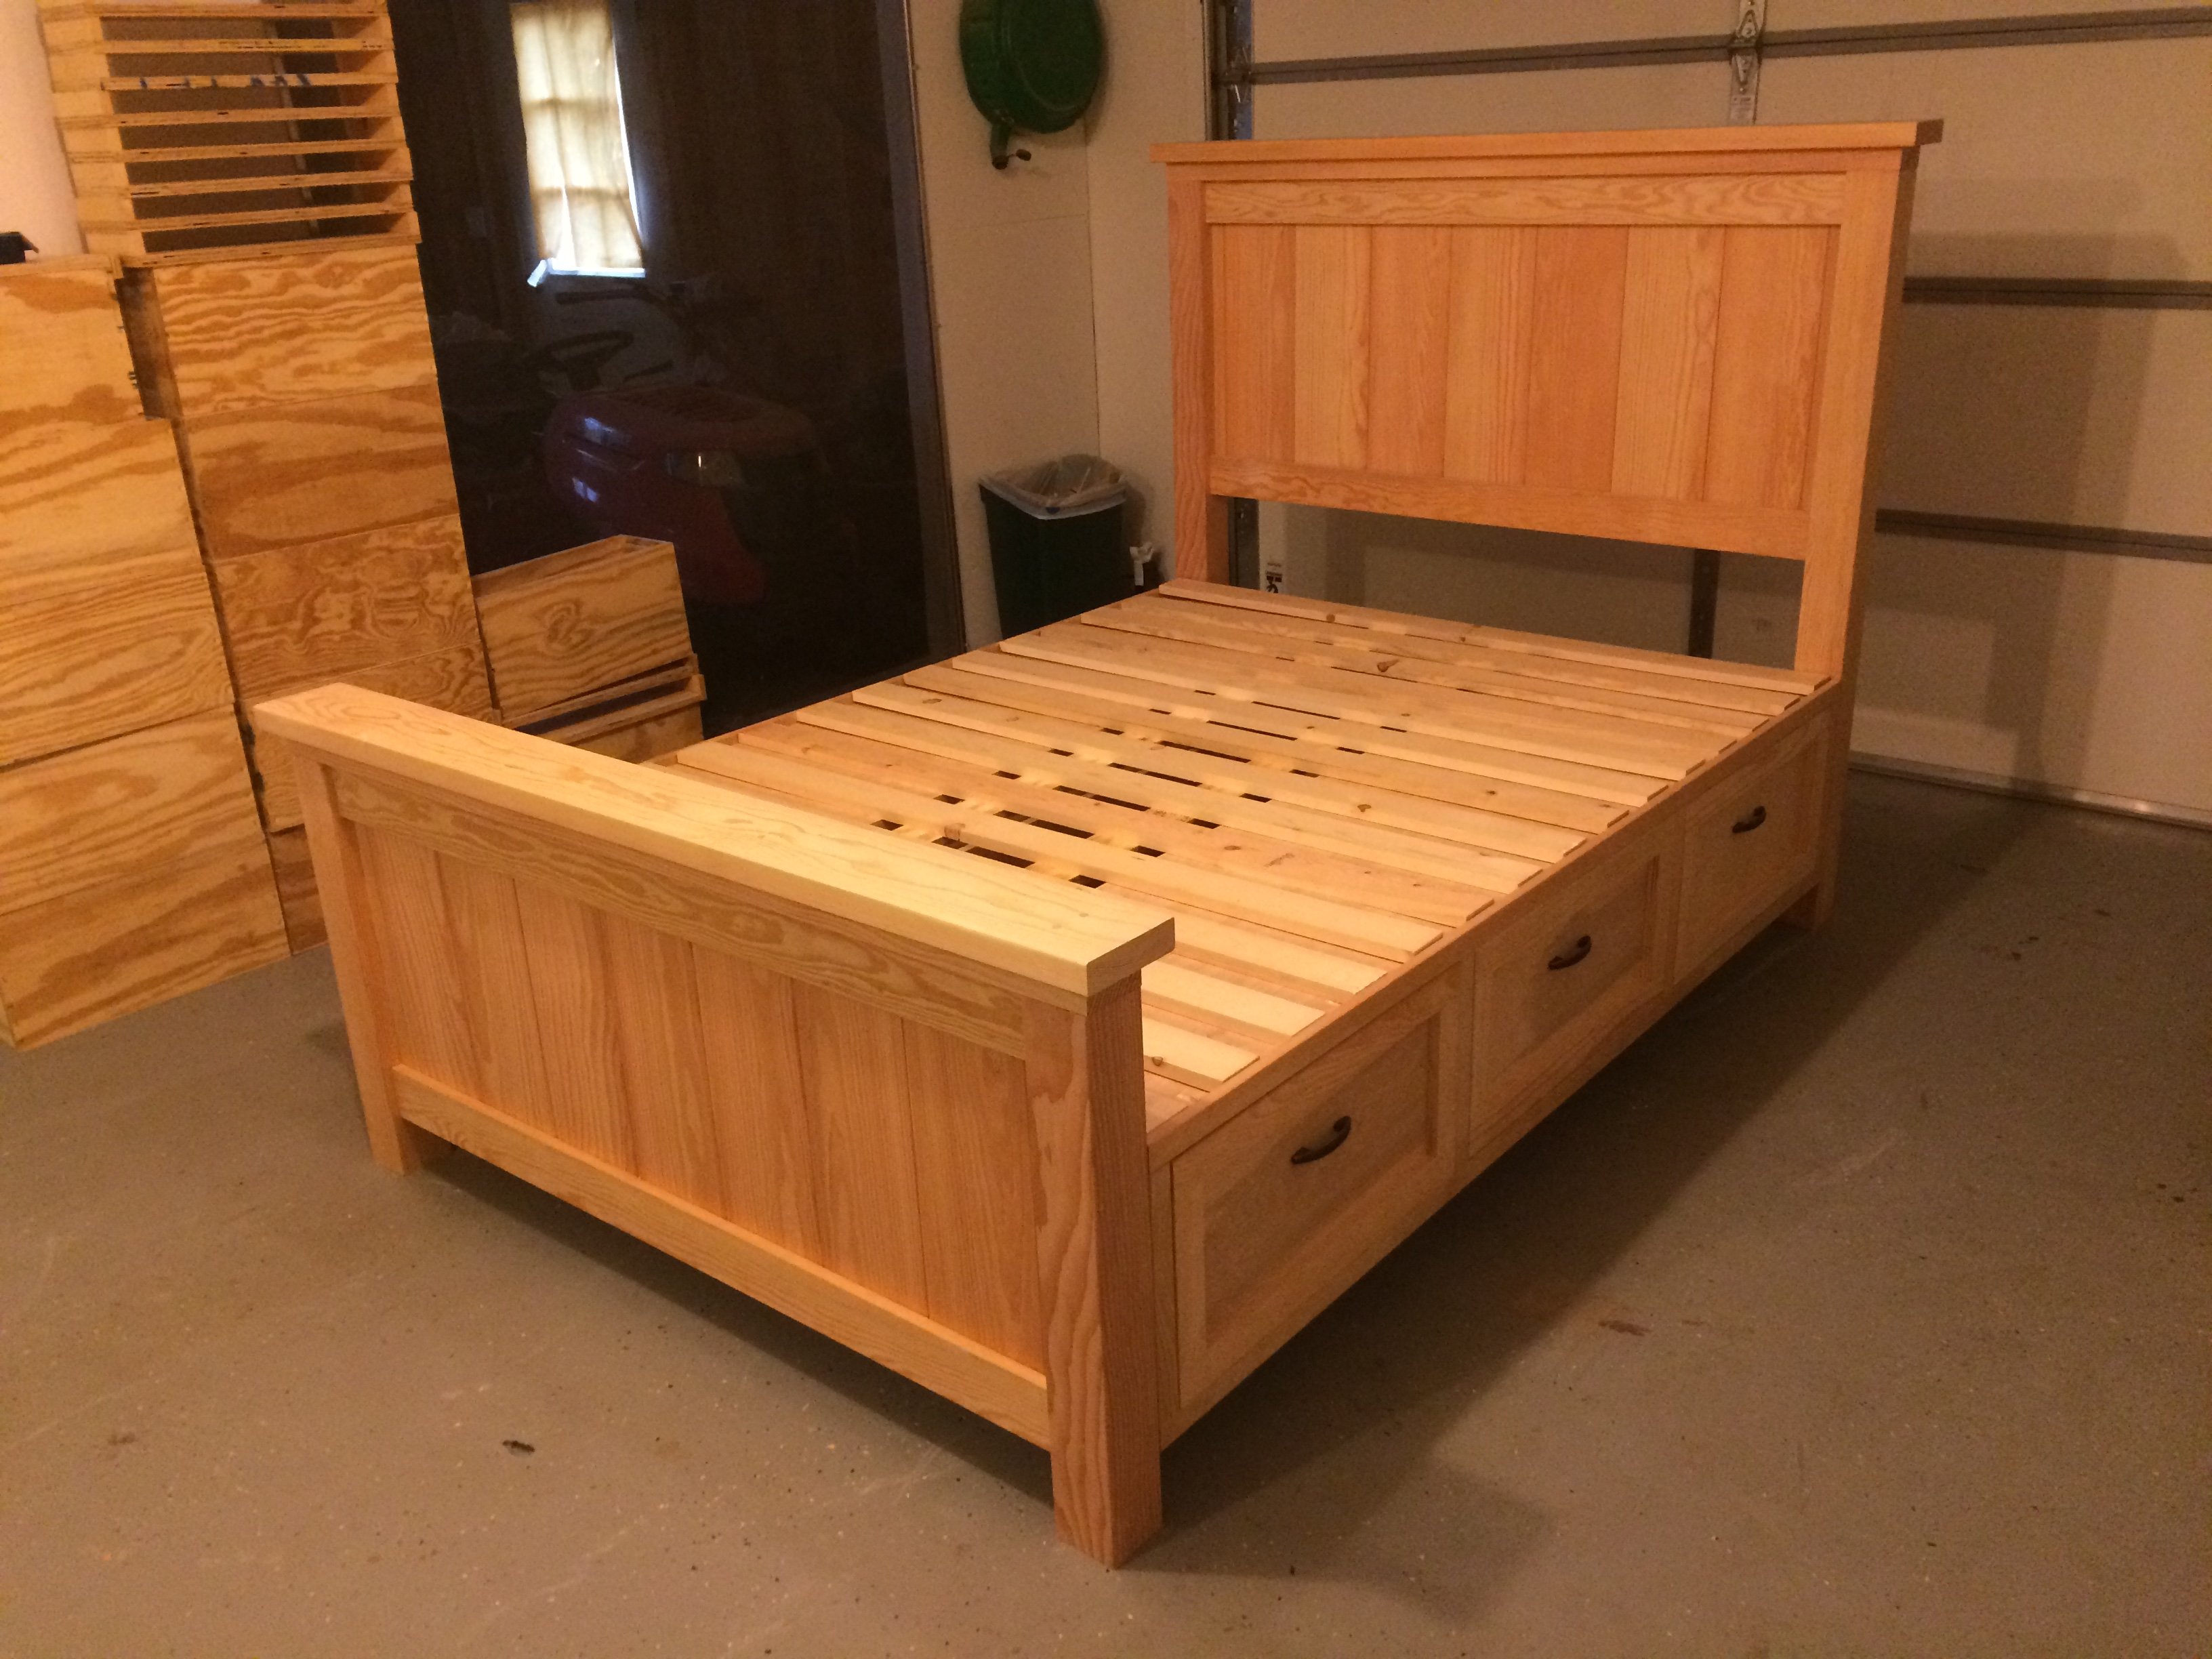 Farmhouse Storage Bed With Drawers, Twin Xl Platform Bed With Storage Plans